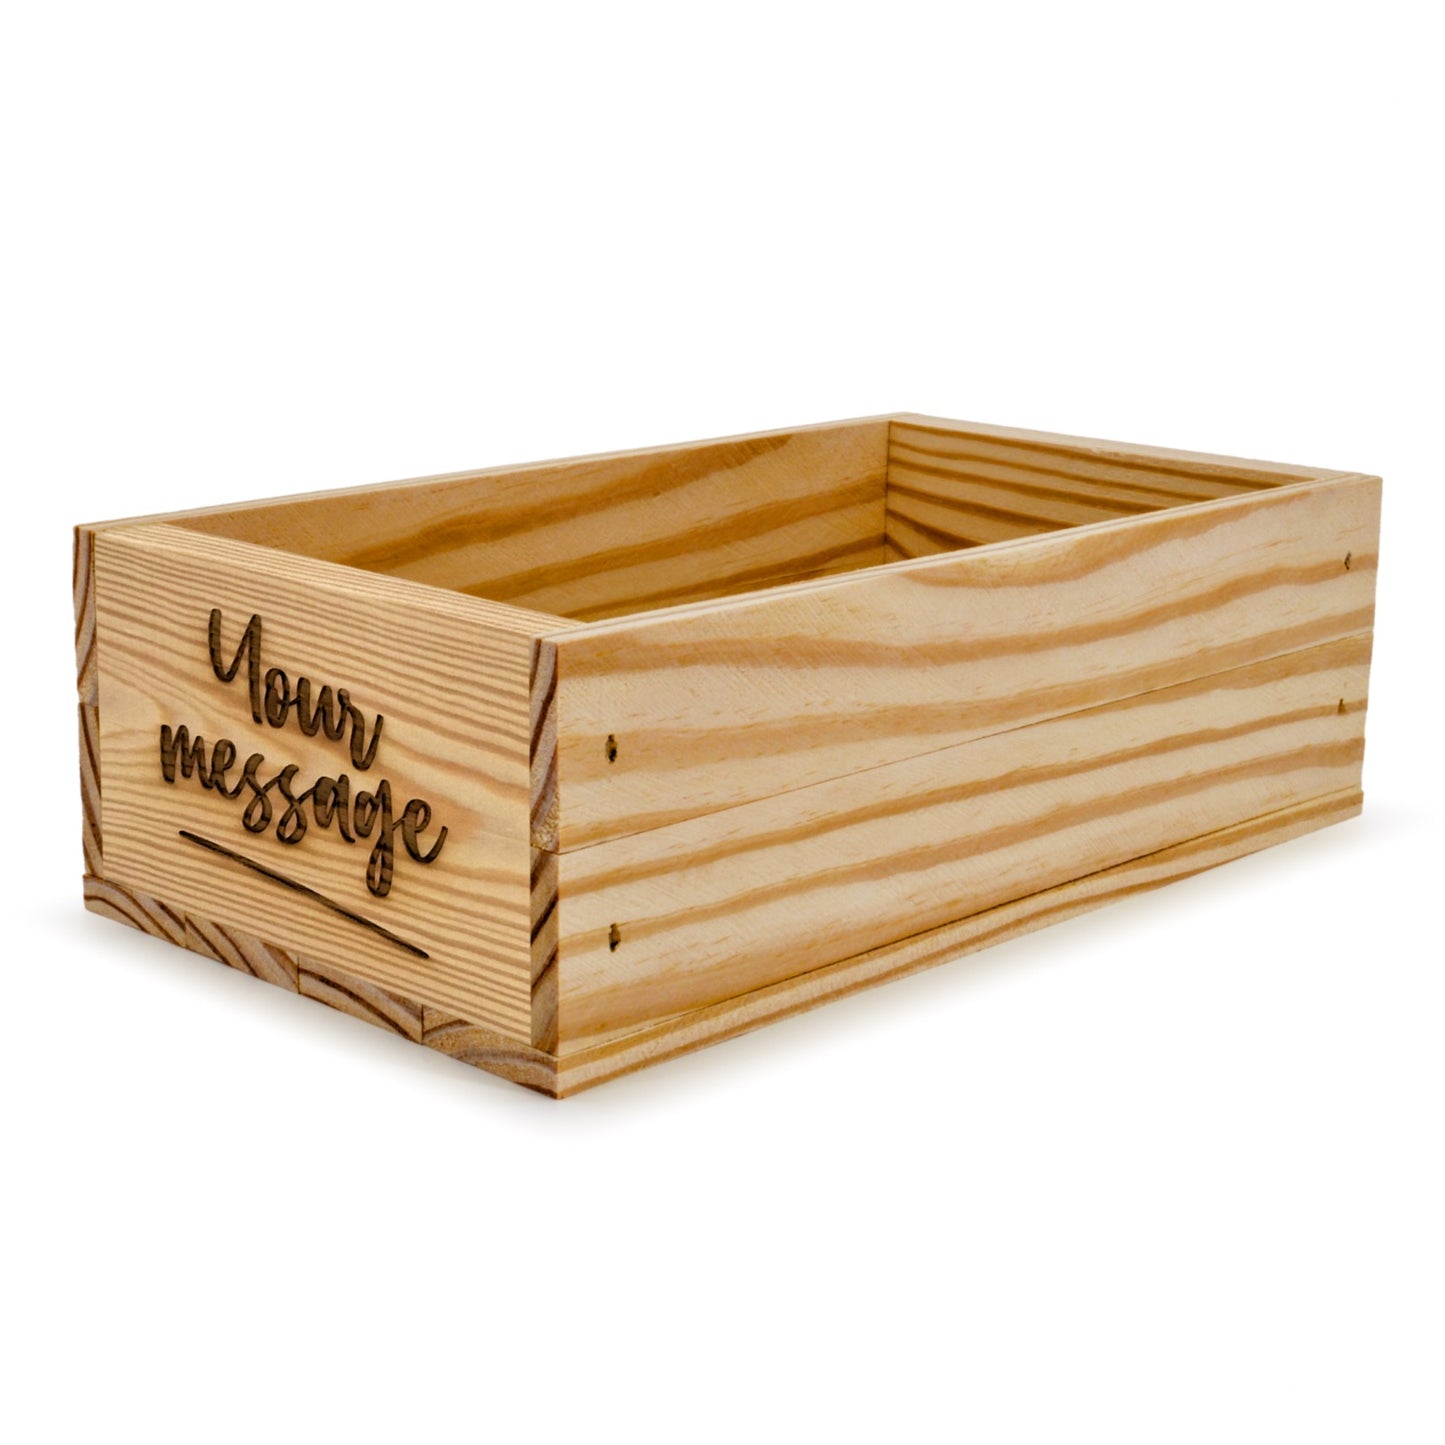 Small wooden crate with custom message 11x6.25x3.5, 6-BX-11-6.25-3.5-ST-NW-NL, 12-BX-11-6.25-3.5-ST-NW-NL, 24-BX-11-6.25-3.5-ST-NW-NL, 48-BX-11-6.25-3.5-ST-NW-NL, 96-BX-11-6.25-3.5-ST-NW-NL